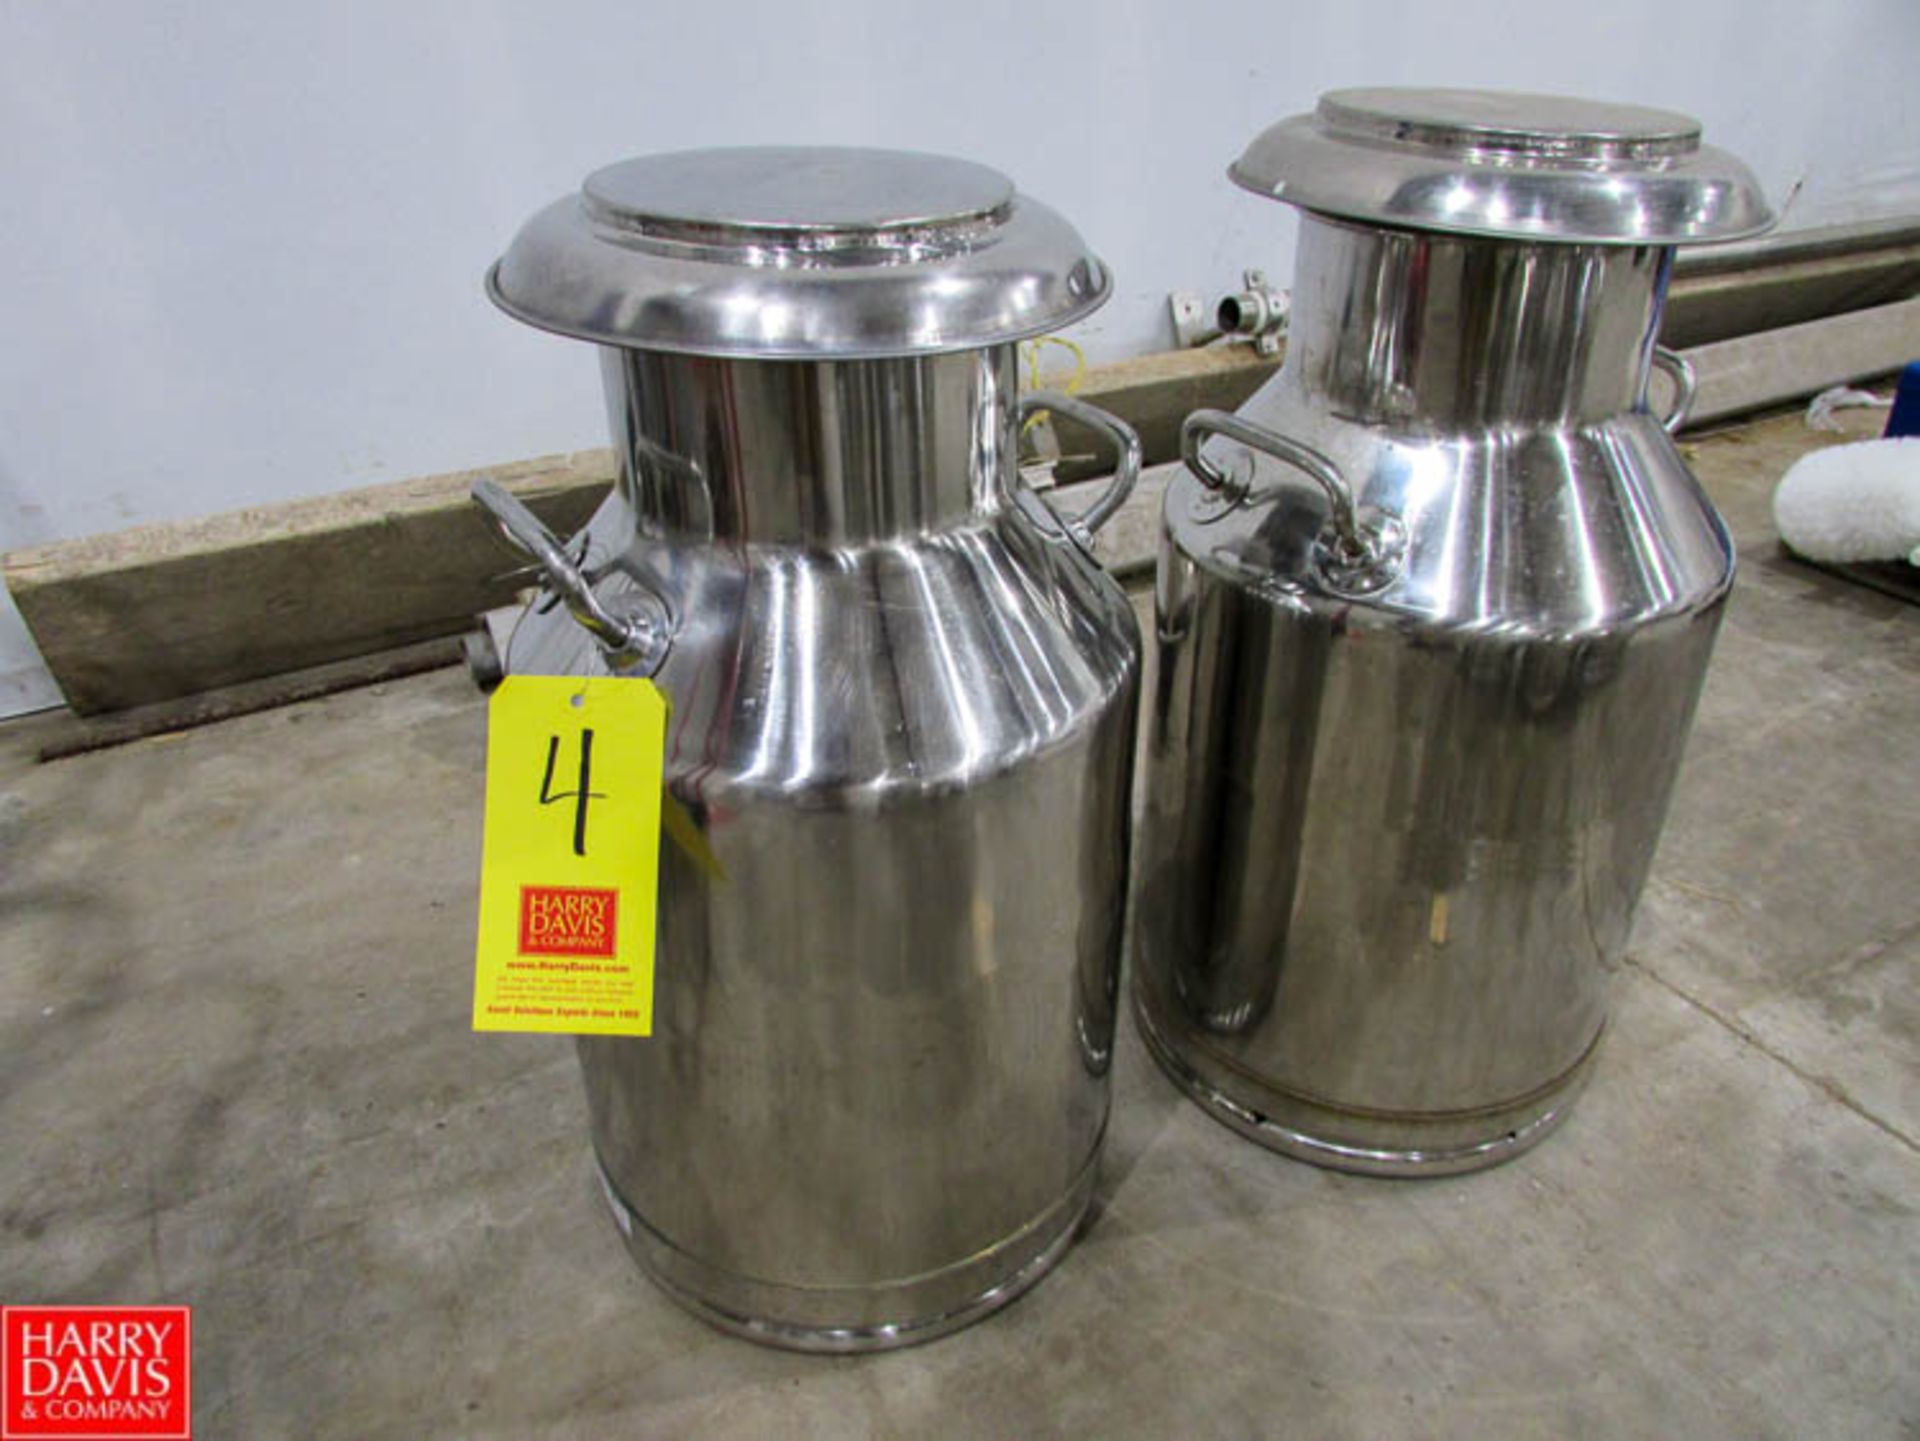 10 Gallon S/S Milk Cans with Lids Rigging Fee: $ 20